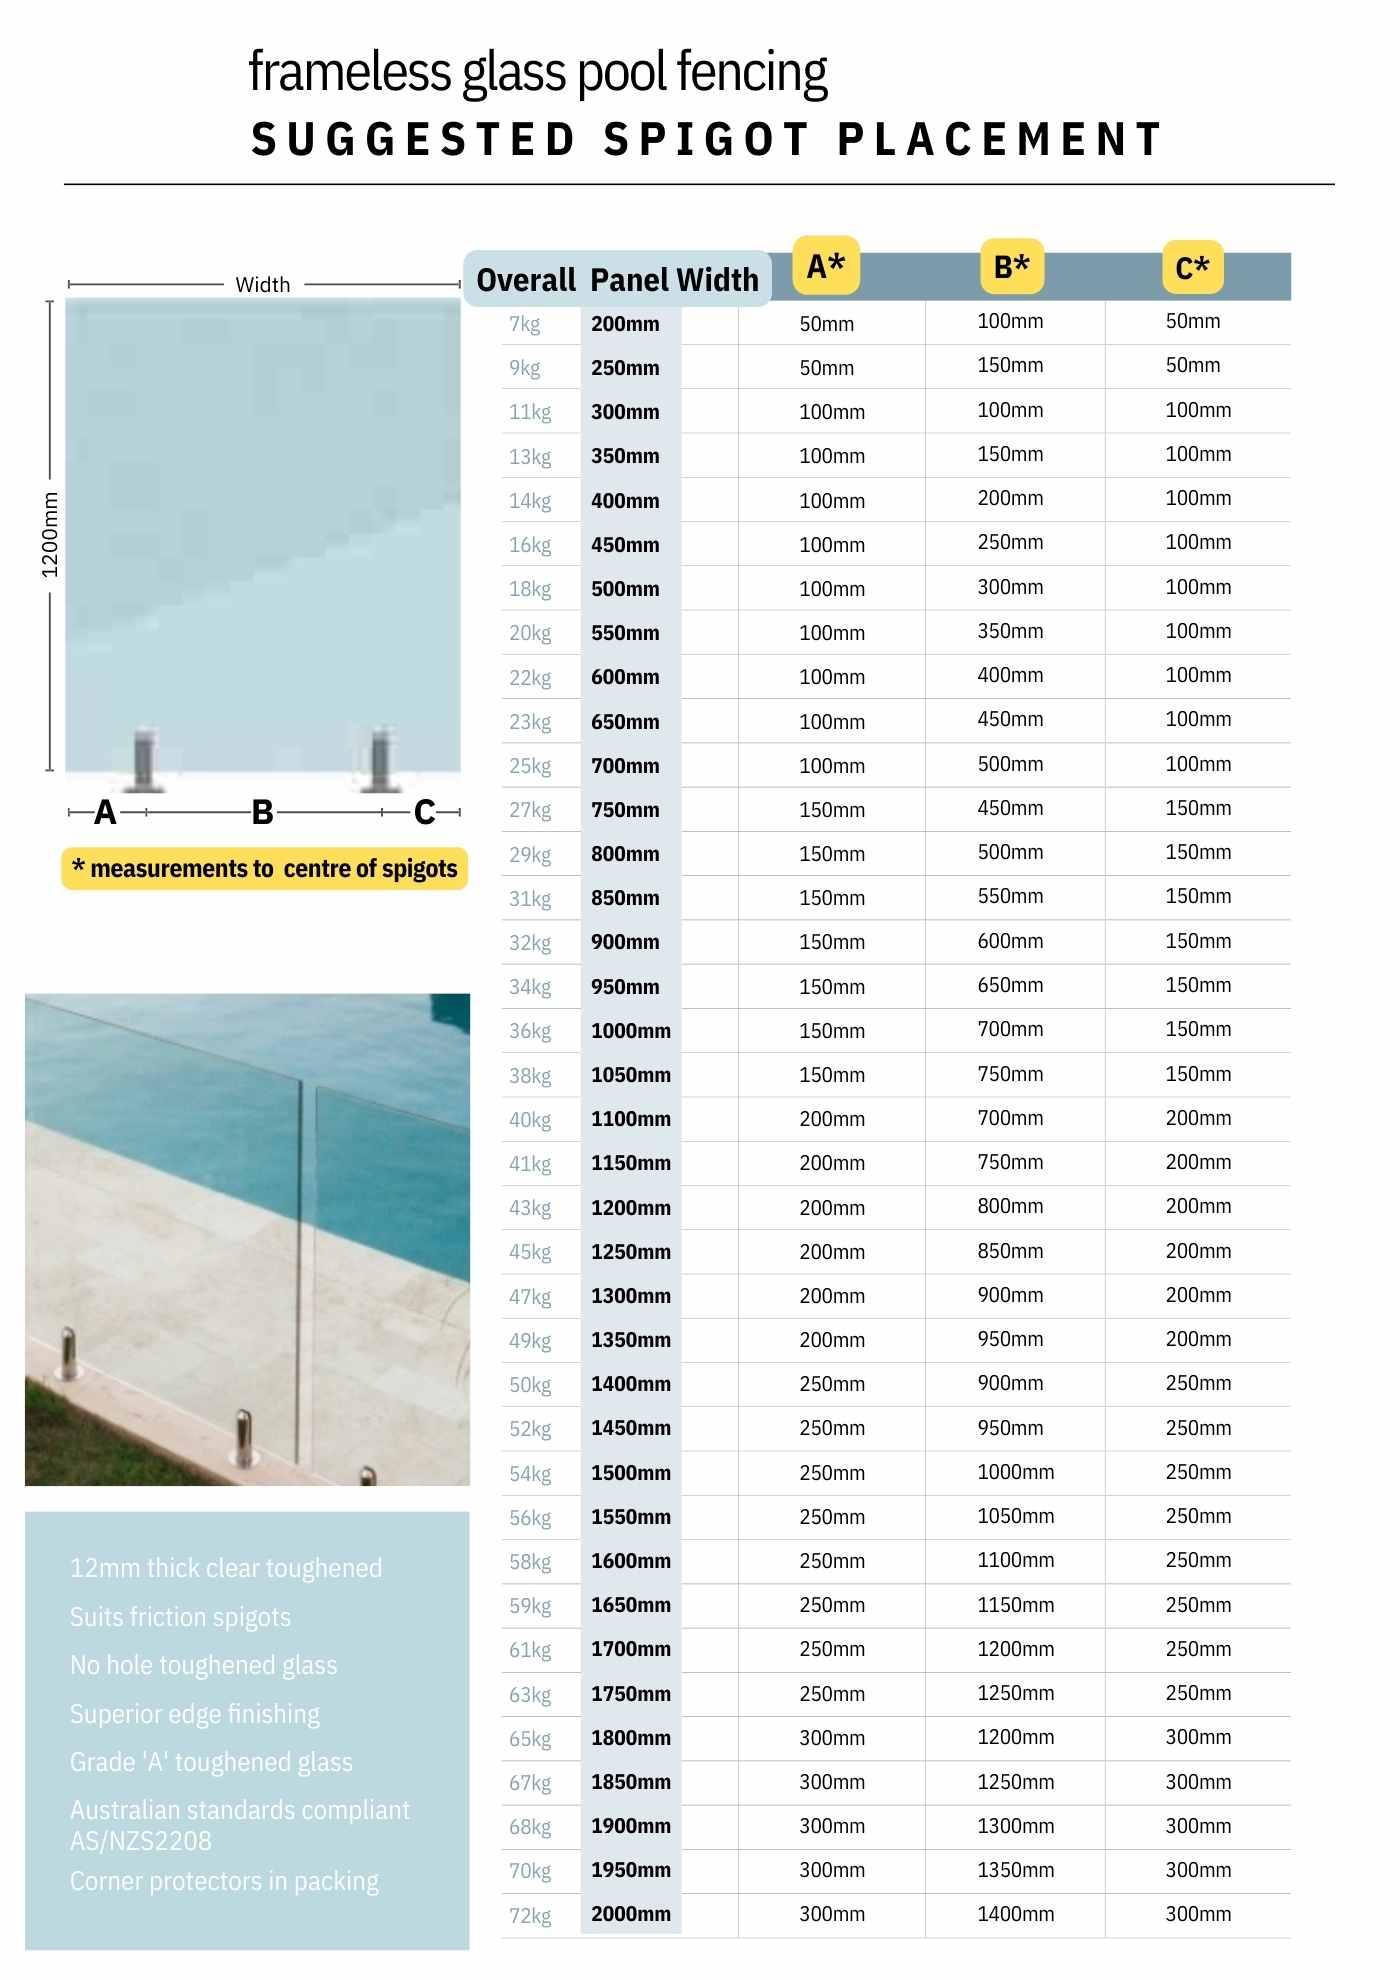 Complete Spigot Placement (and weight) Chart  for spigot placement for every size of Frameless Glass Pool Fence Panels. The Ultimate Fast & Easy Pool Glass Spigot Spacing Table - Fence Guru